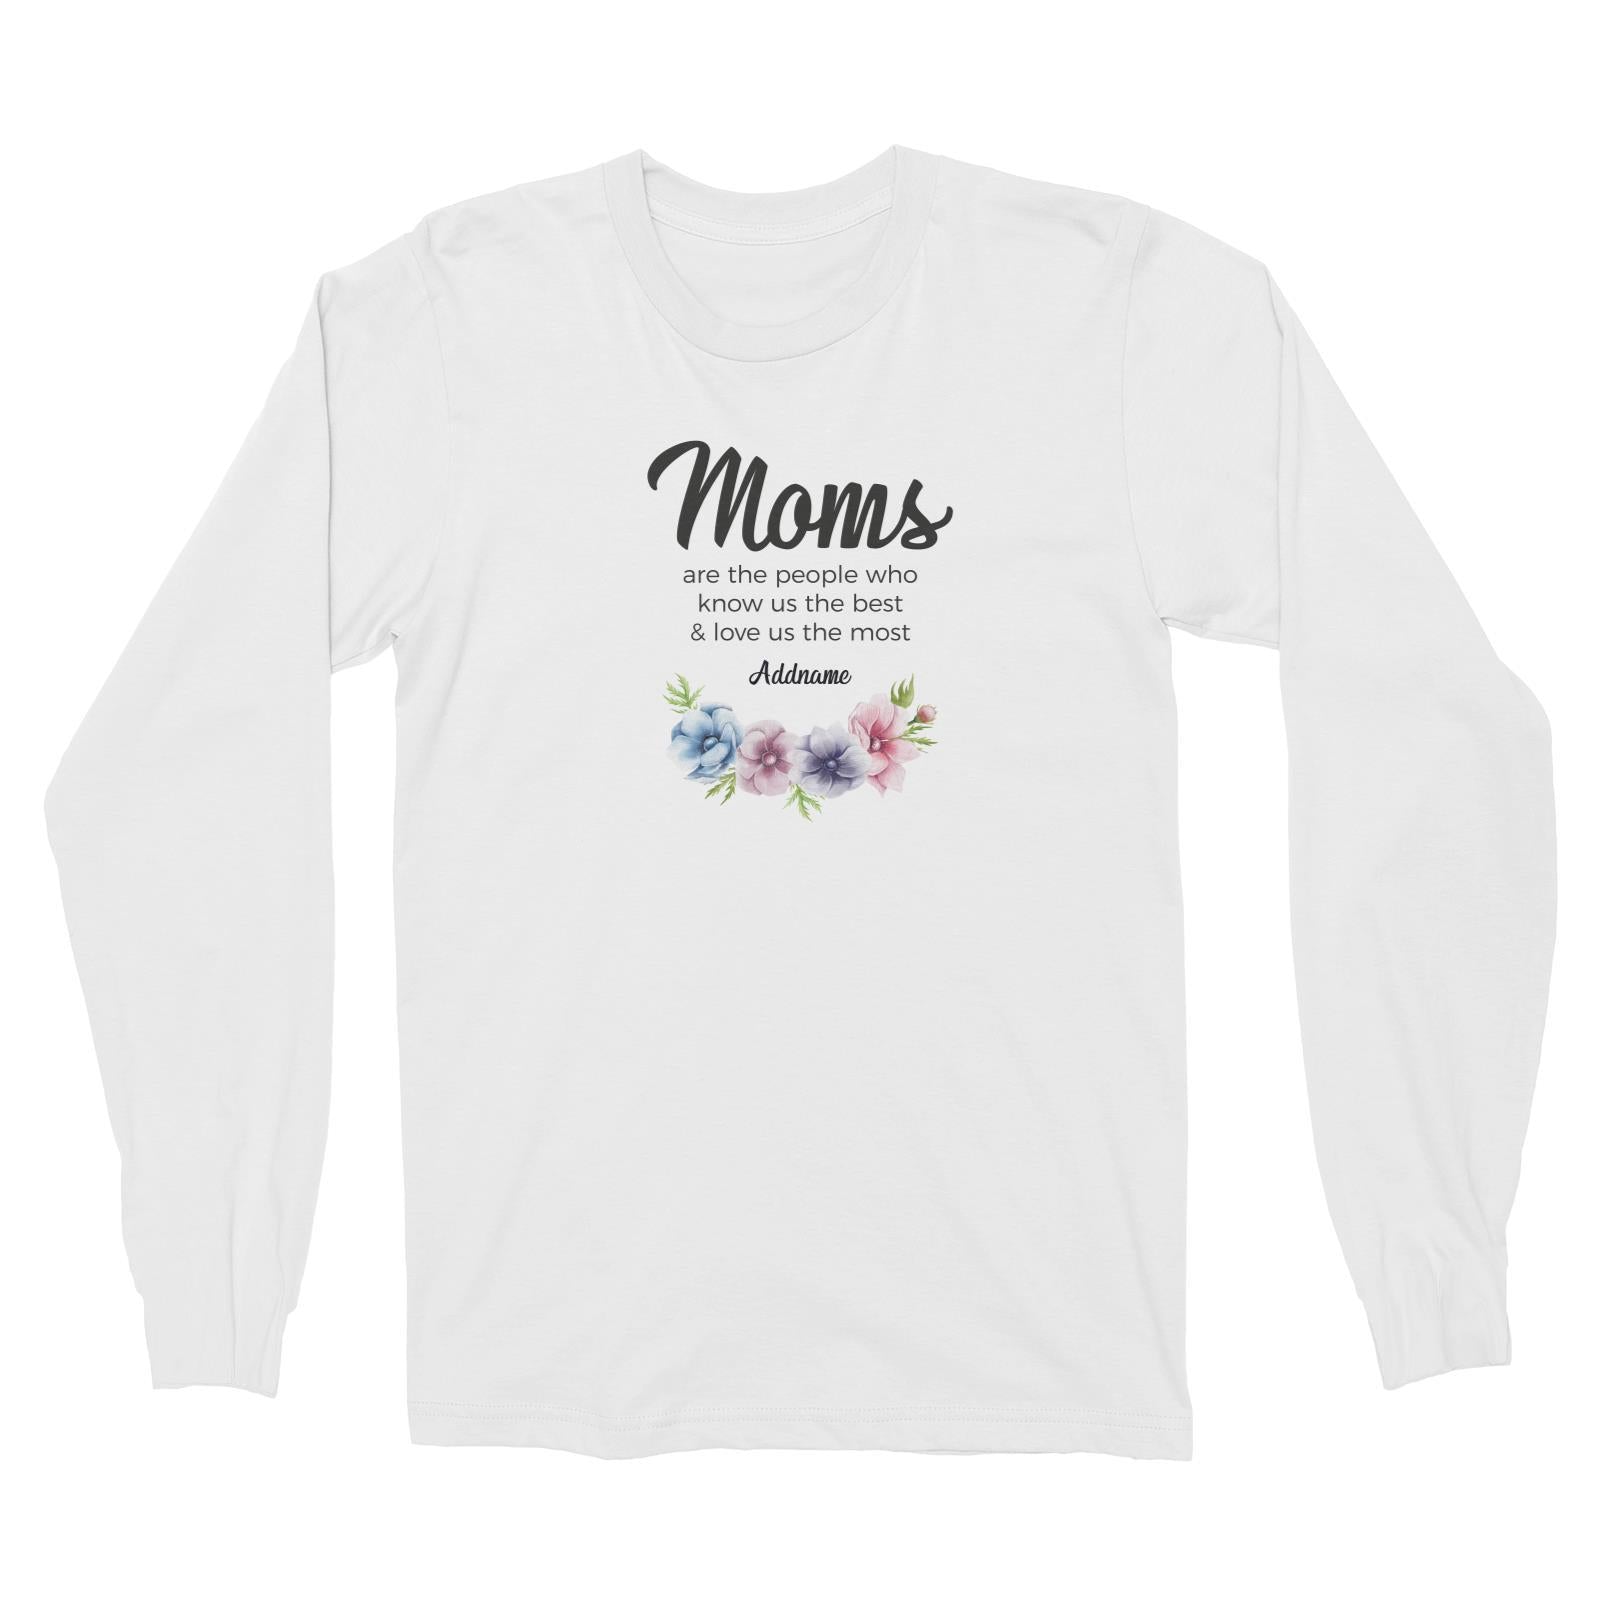 Sweet Mom Quotes 1 Moms Are The People Who Know Us The Best & Love Us The Most Addname Long Sleeve Unisex T-Shirt